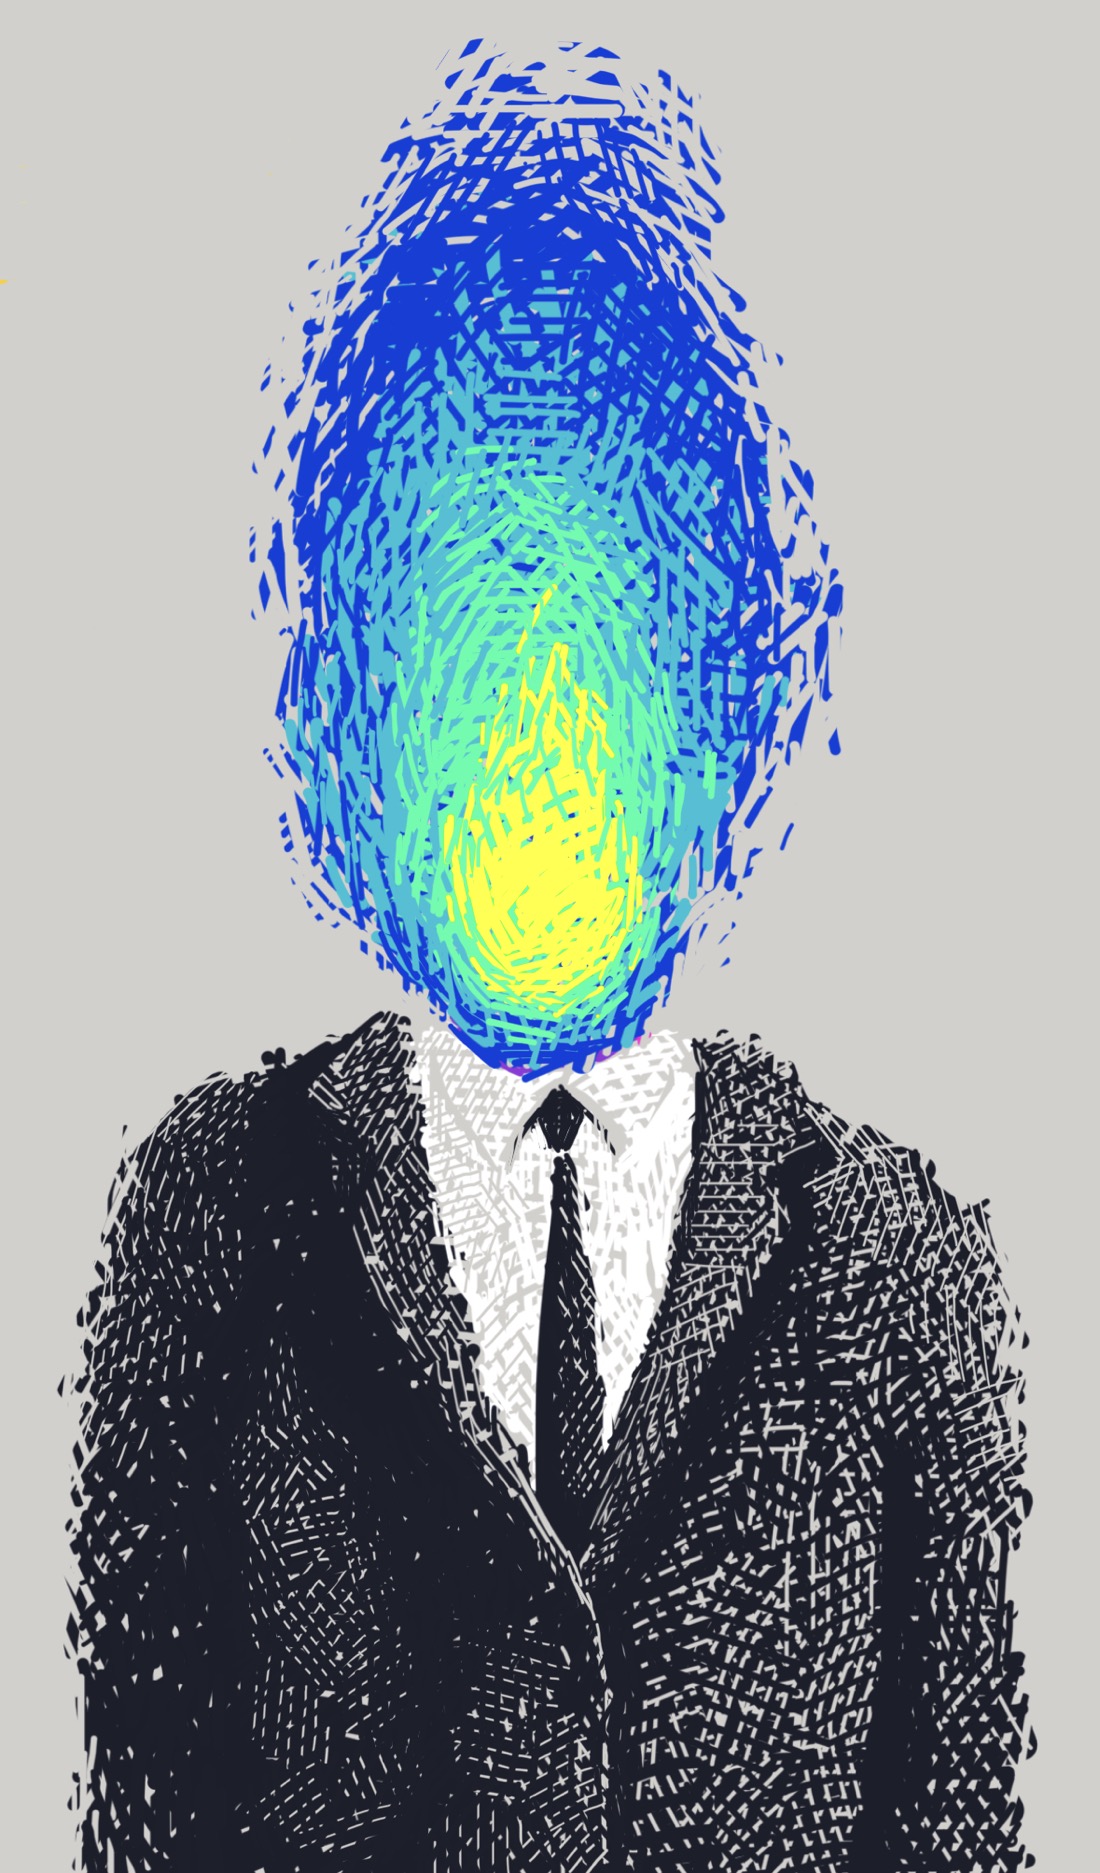 A figure wearing a black suit and a tie. The figure's head is a spouting, flame-shaped jet of blue and green, with a yellow center. This is not as disgusting as it sounds. It's not clear whether this is a flame or a substance, but such distinctions are of dubious relevance when the subject matter is metaphorical.